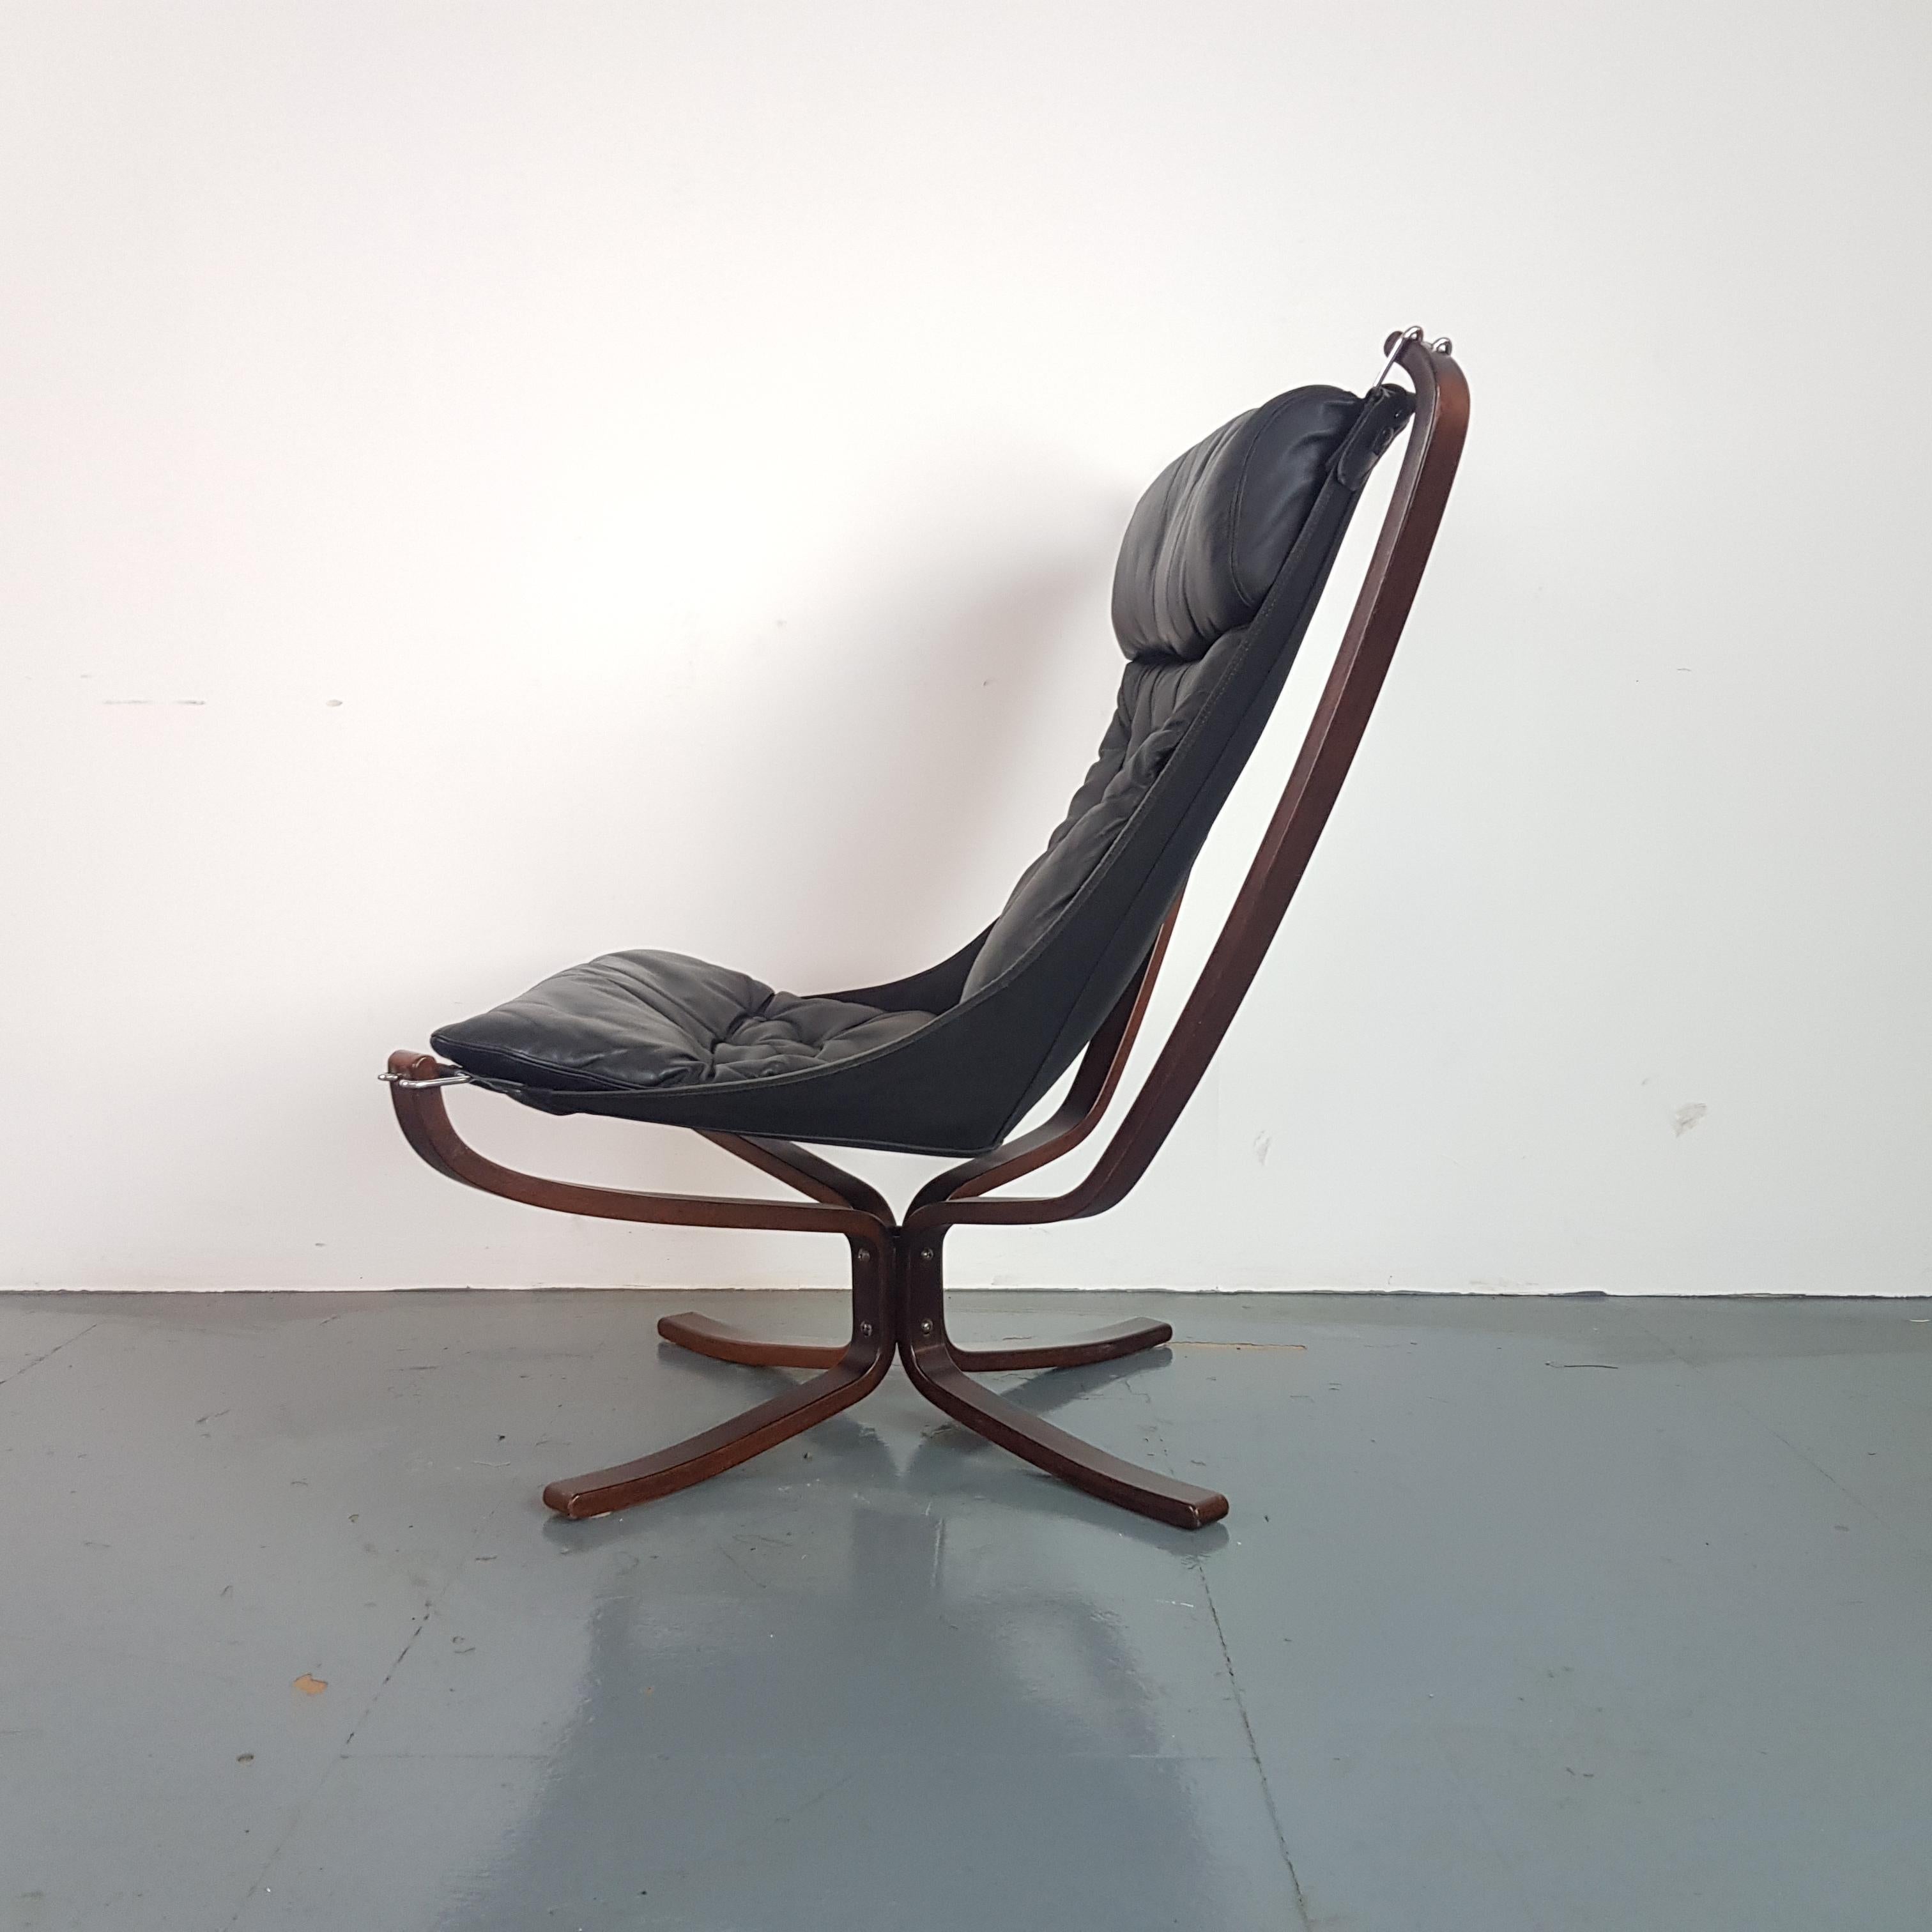 Vintage 1970s High Back Black Leather Falcon Chair Designed by Sigurd Resell In Good Condition In Lewes, East Sussex